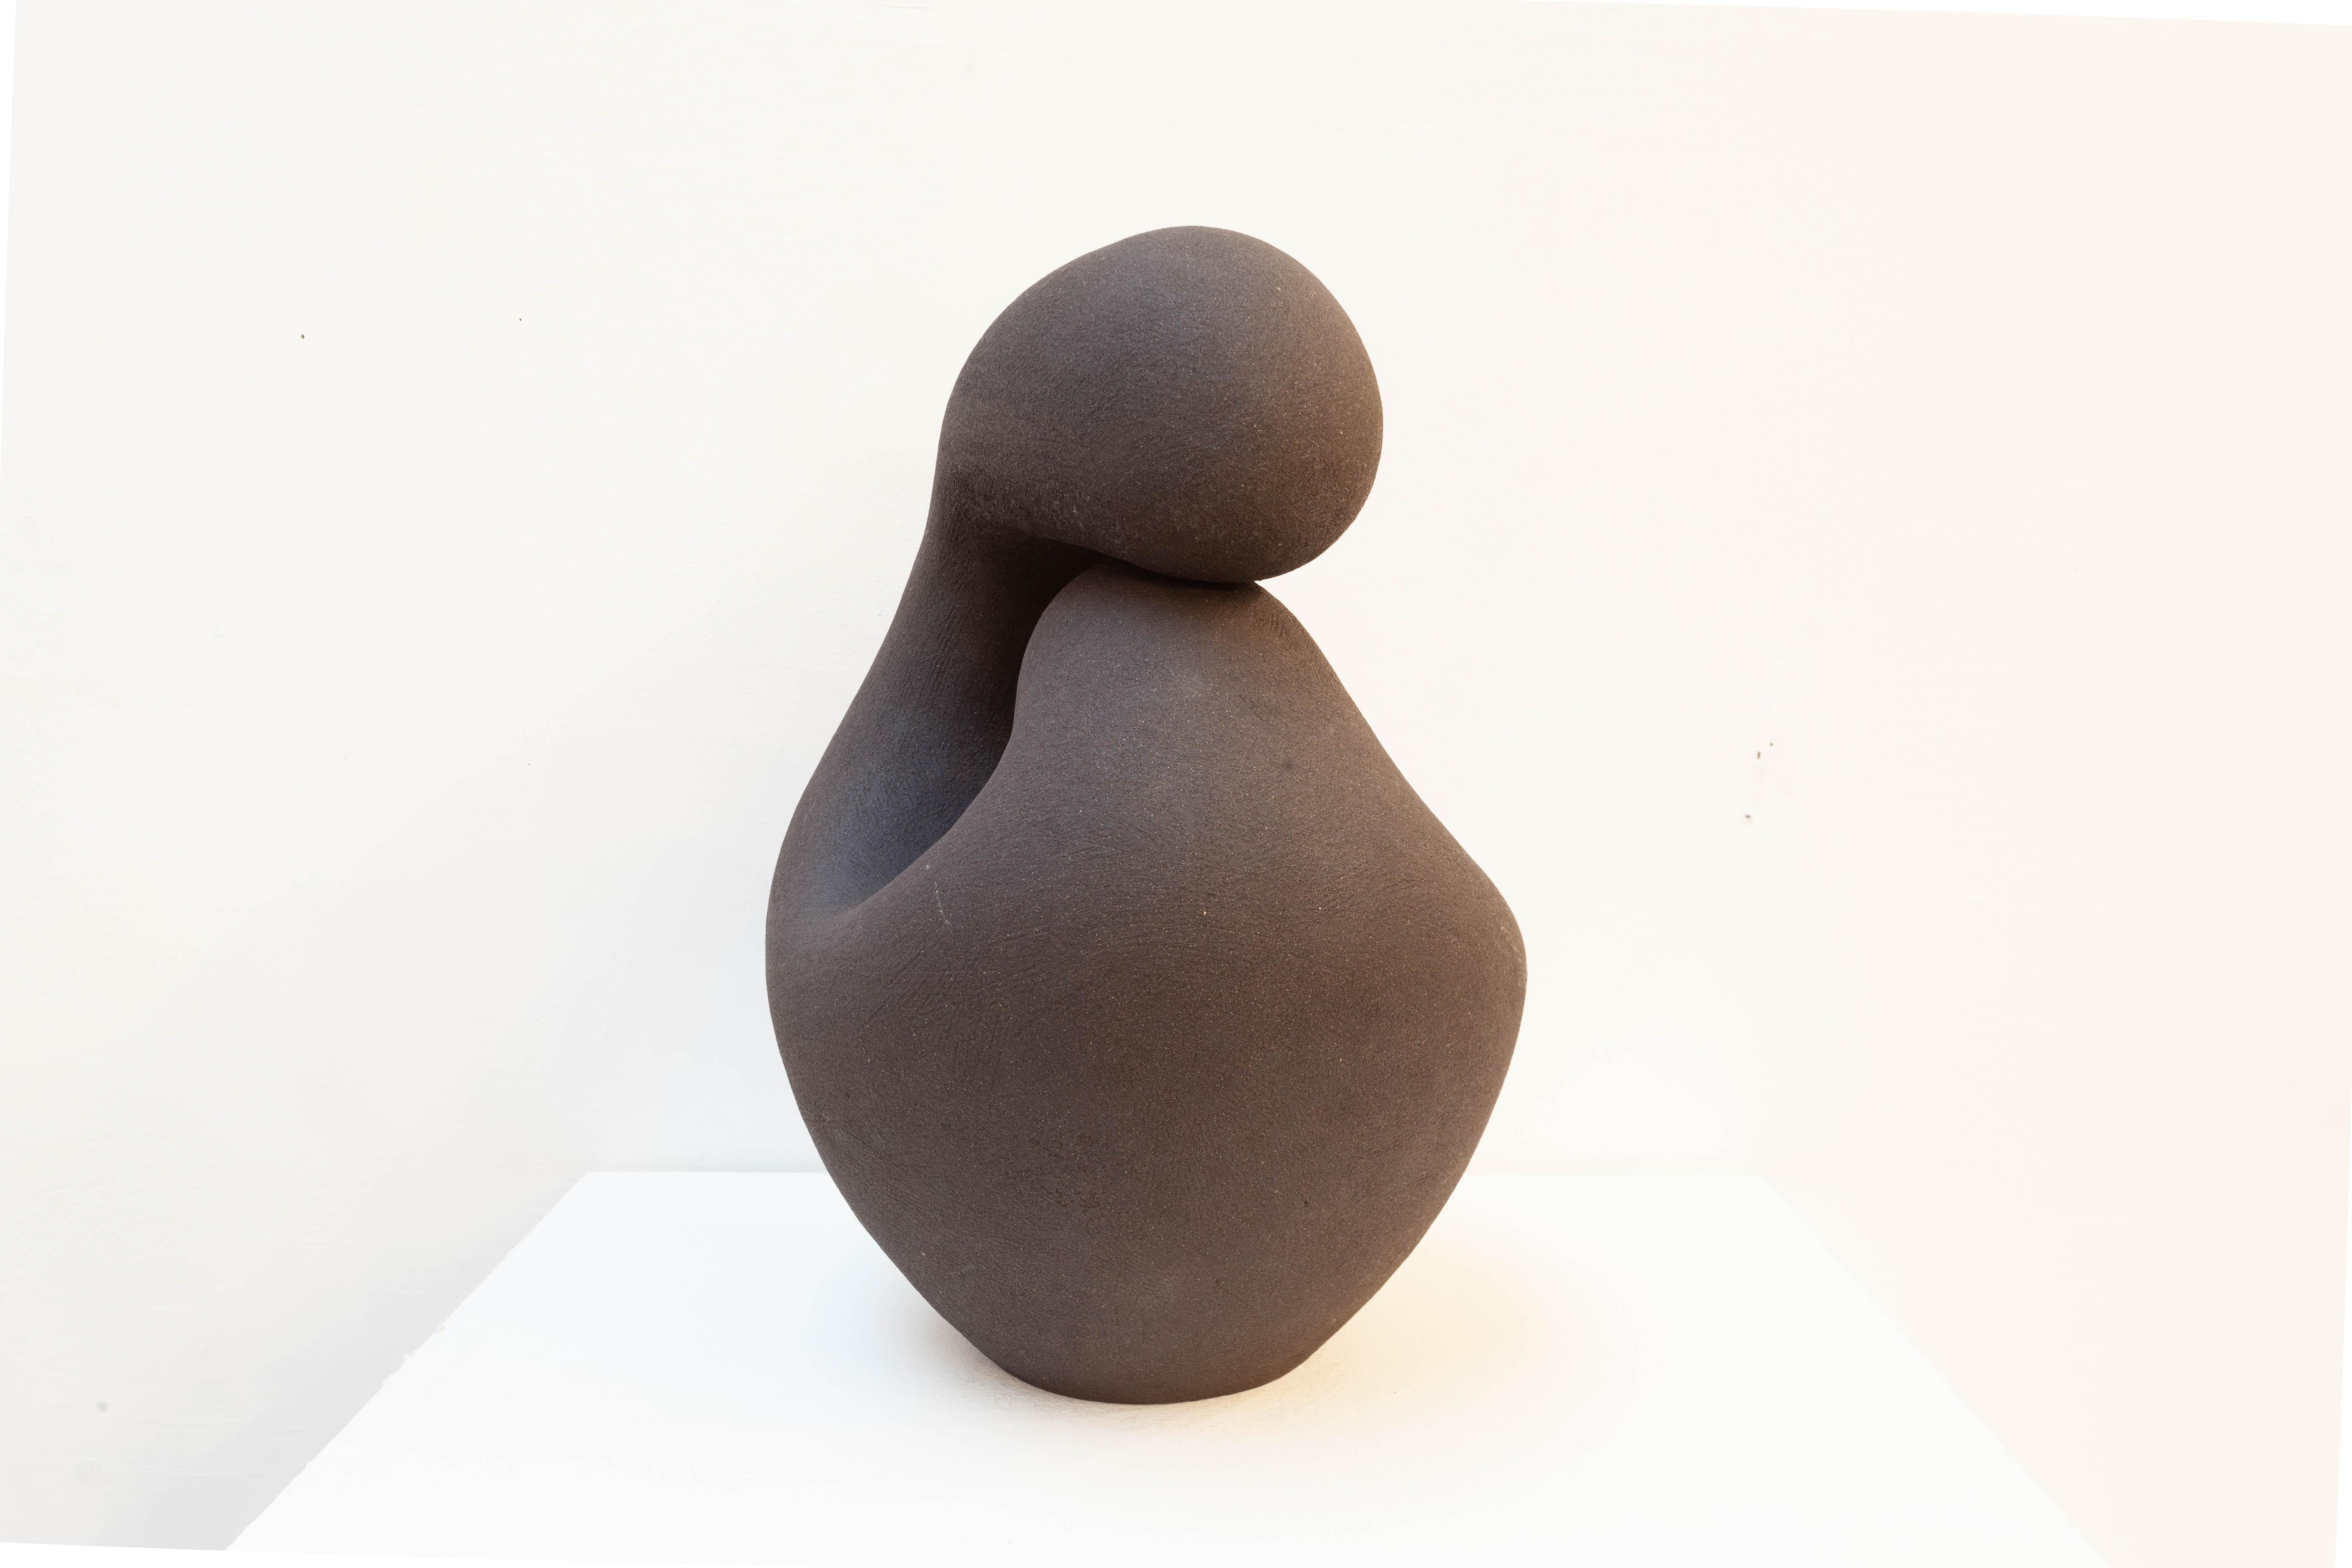 Cuddle - Abstract Sculpture by Alison McGechie